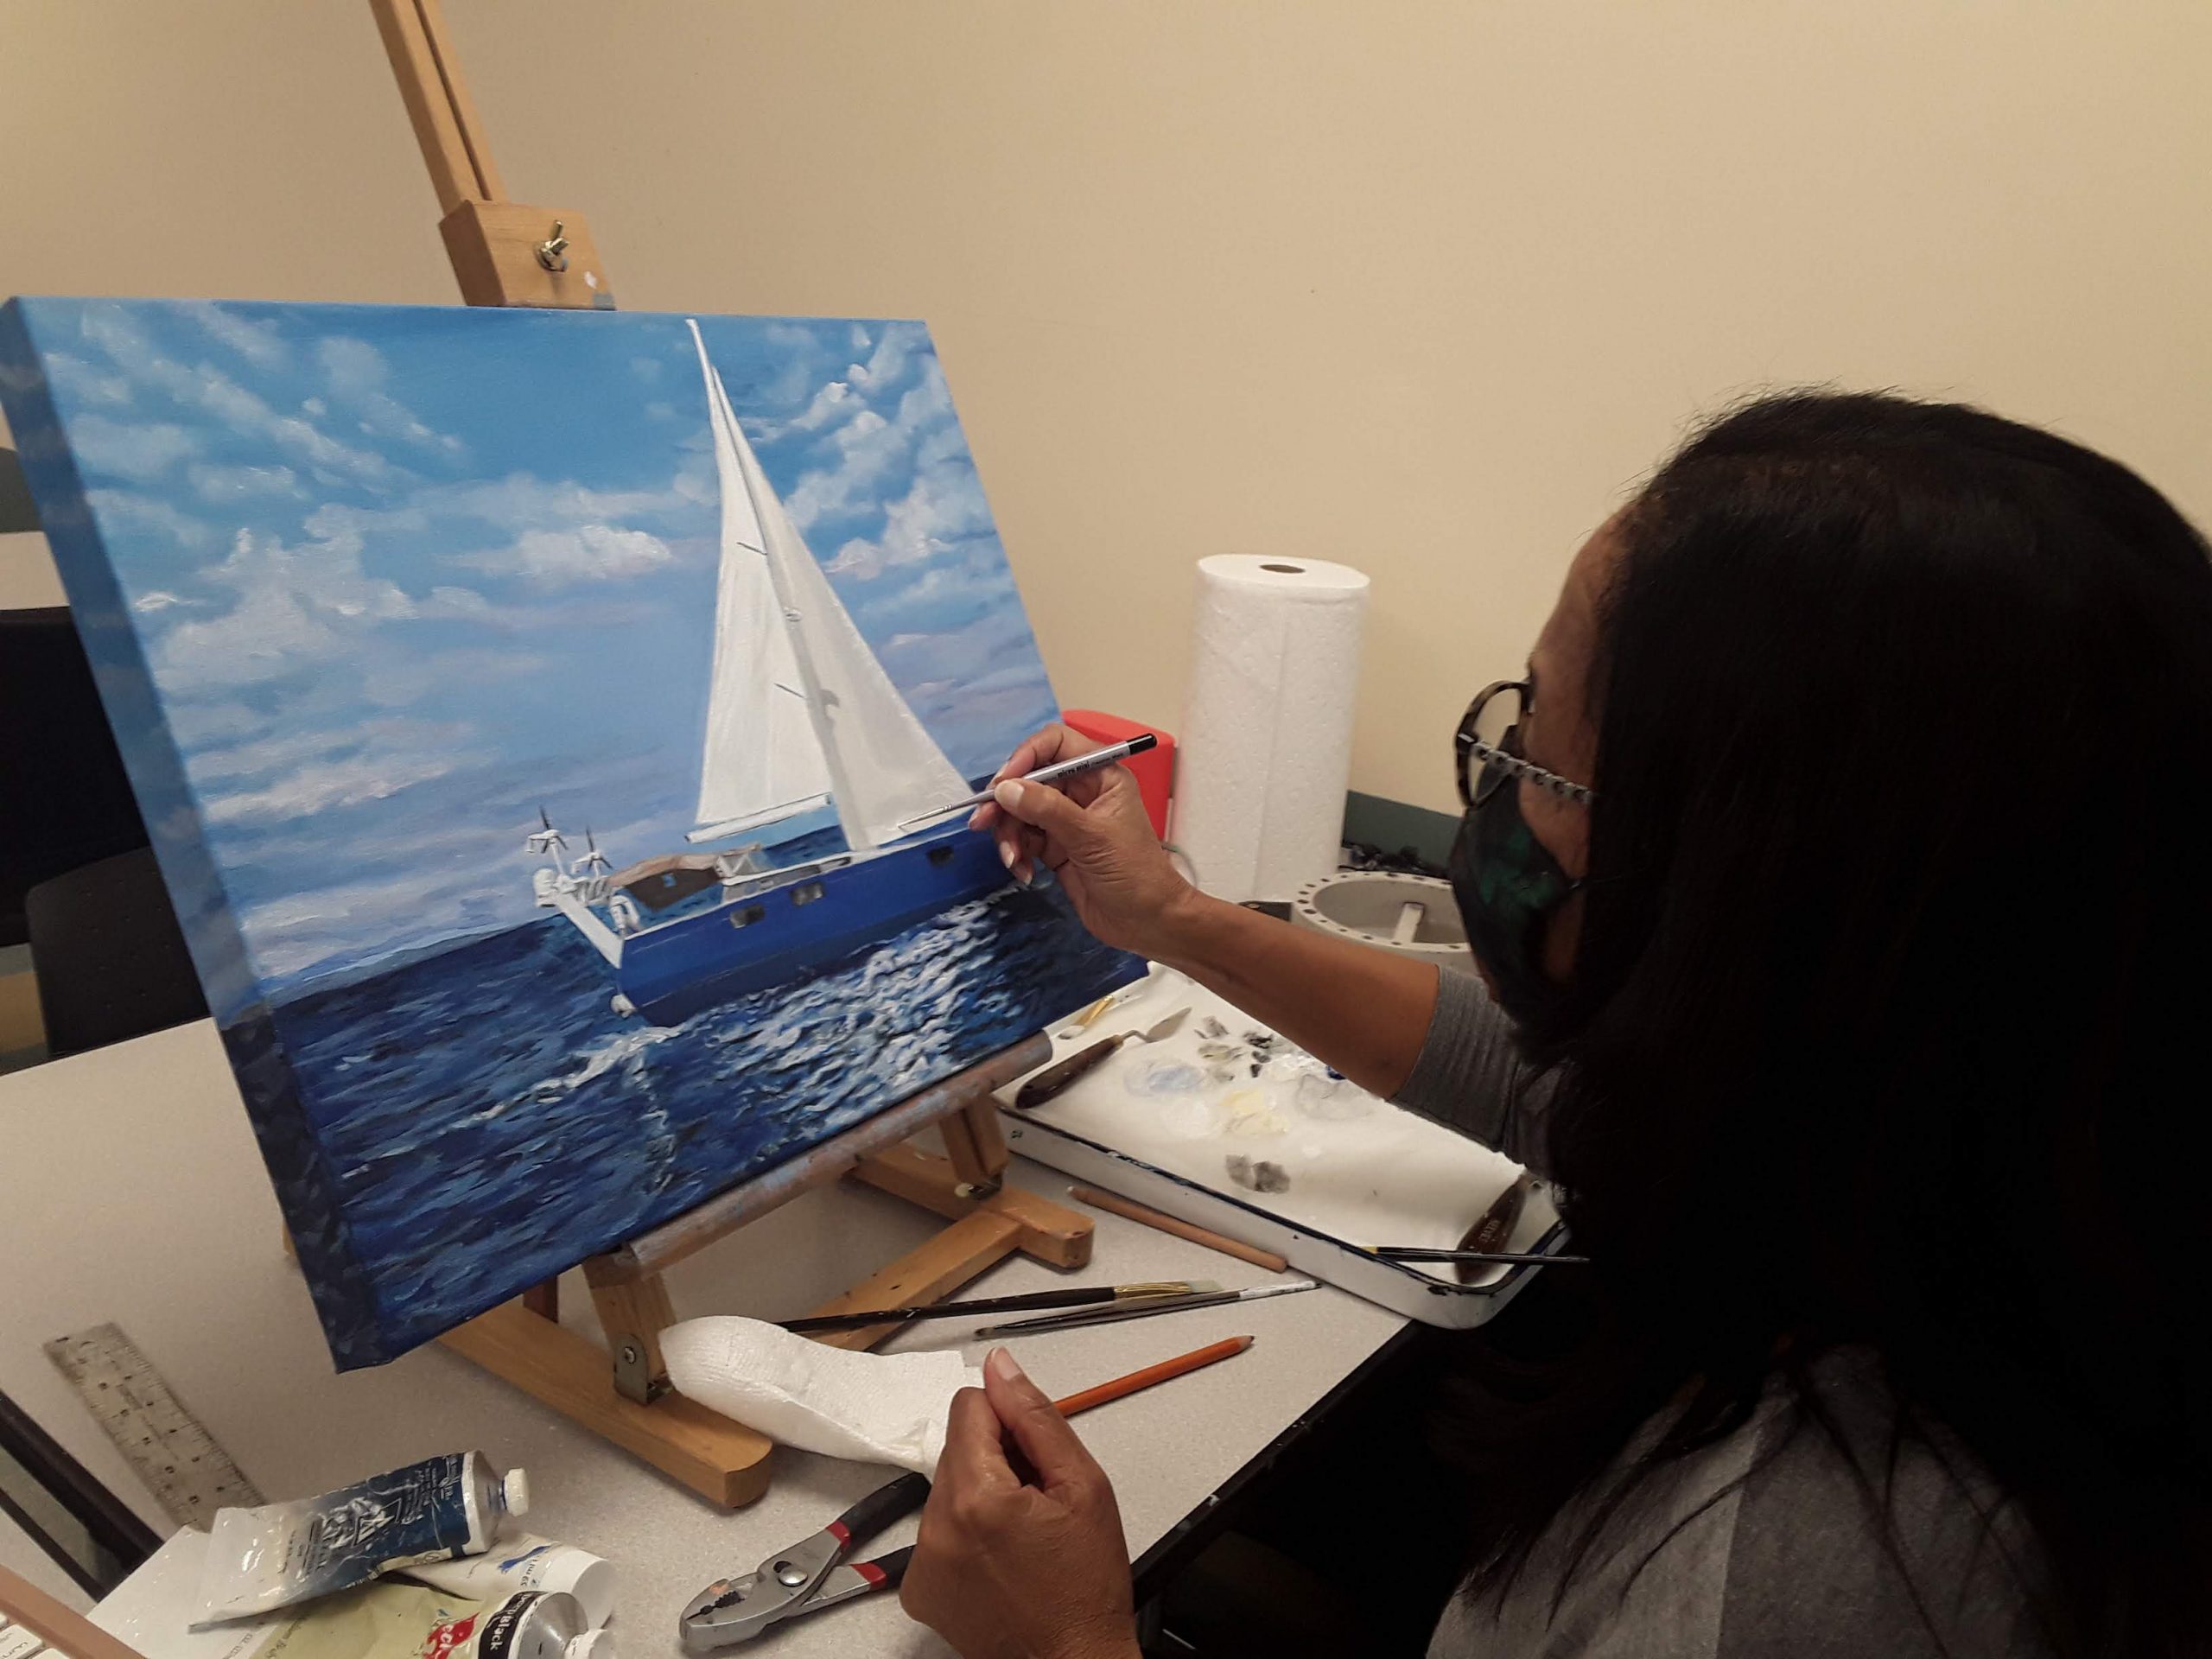 Student painting a sailboat on an easel